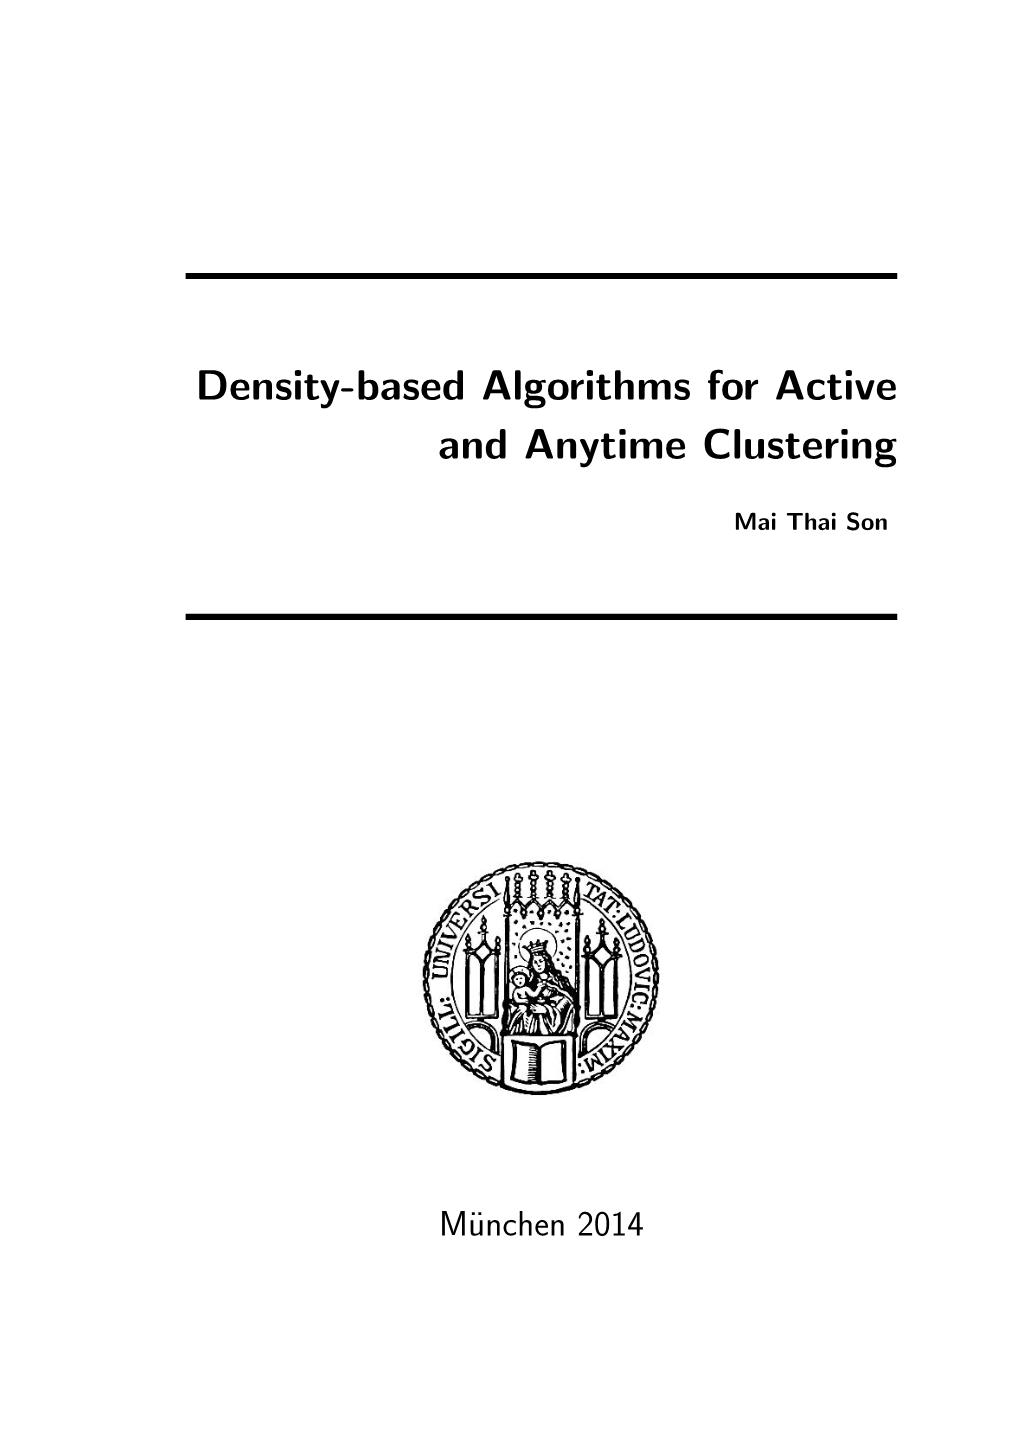 Density-Based Algorithms for Active and Anytime Clustering